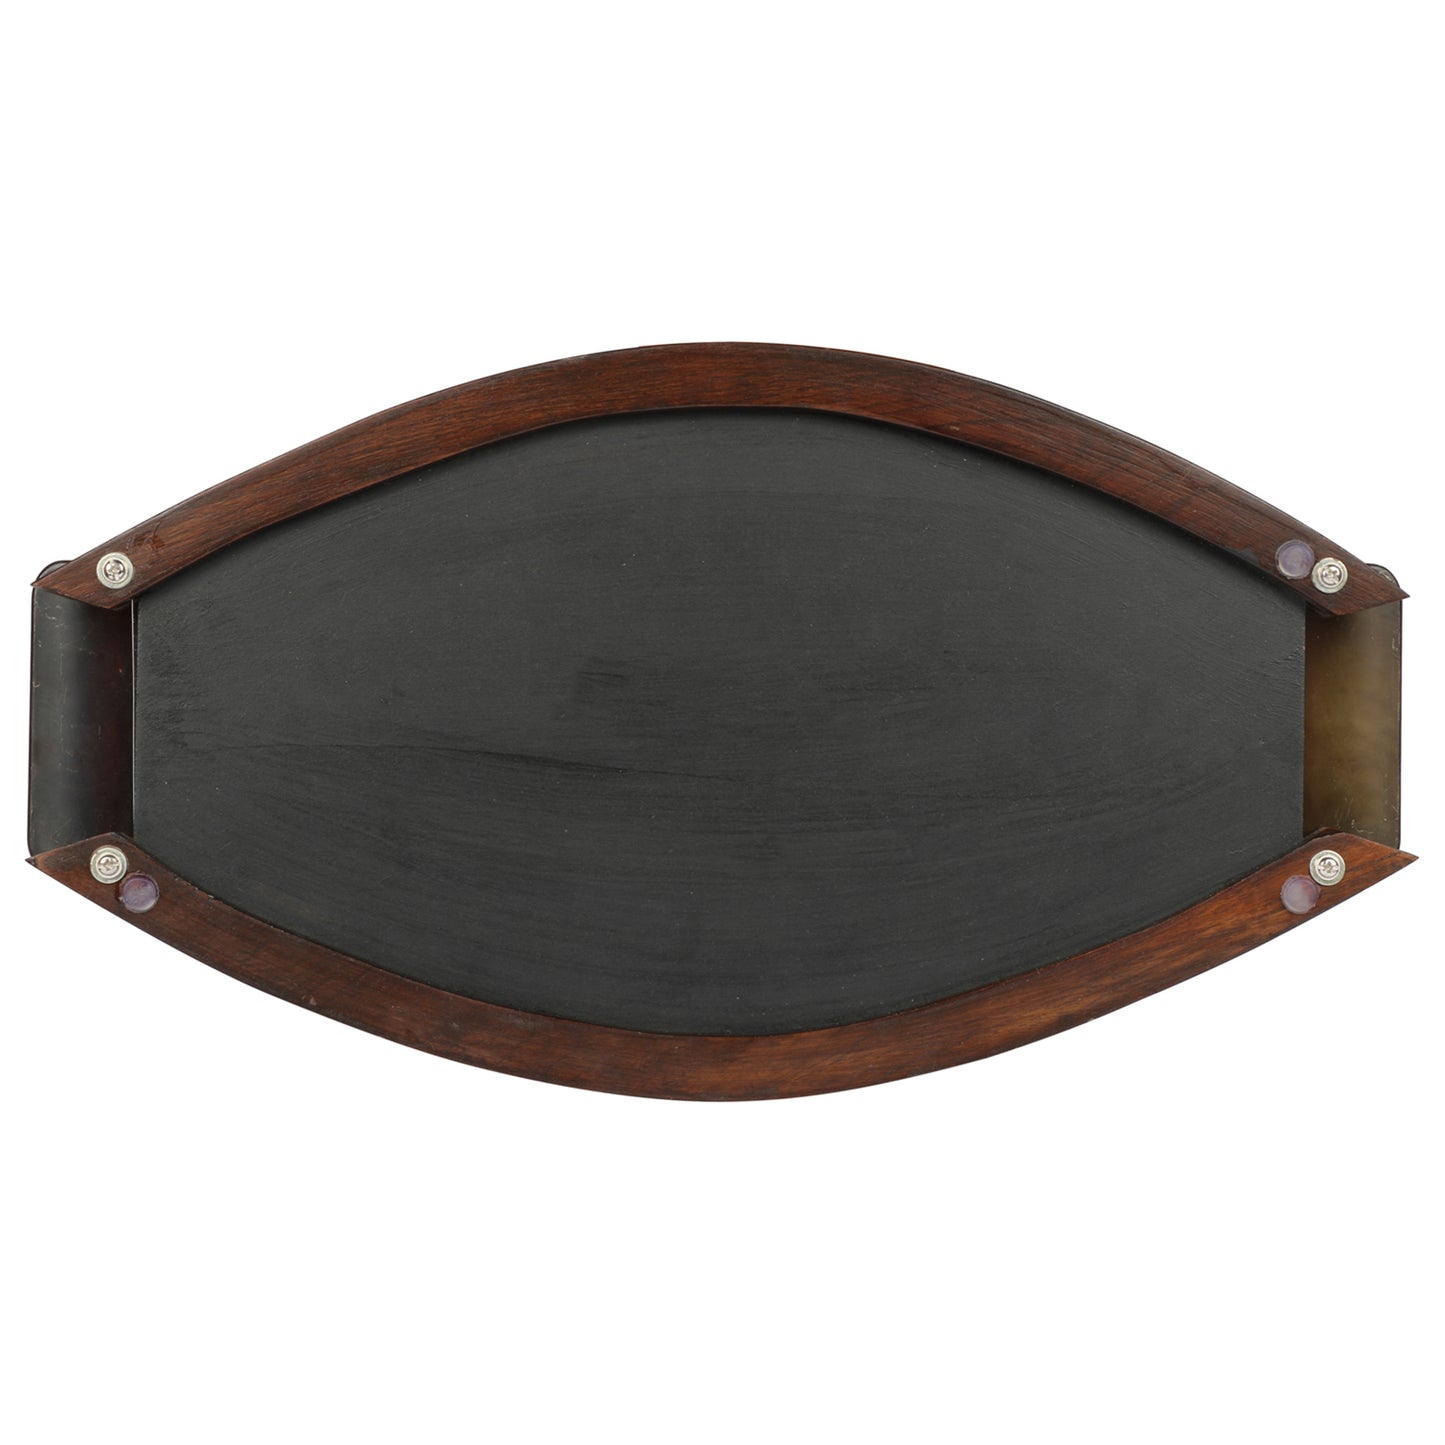 AAC-41-02-23-PB Oval Tray handcrafted & Framed with Metal Handles, Orange (18x9.5)